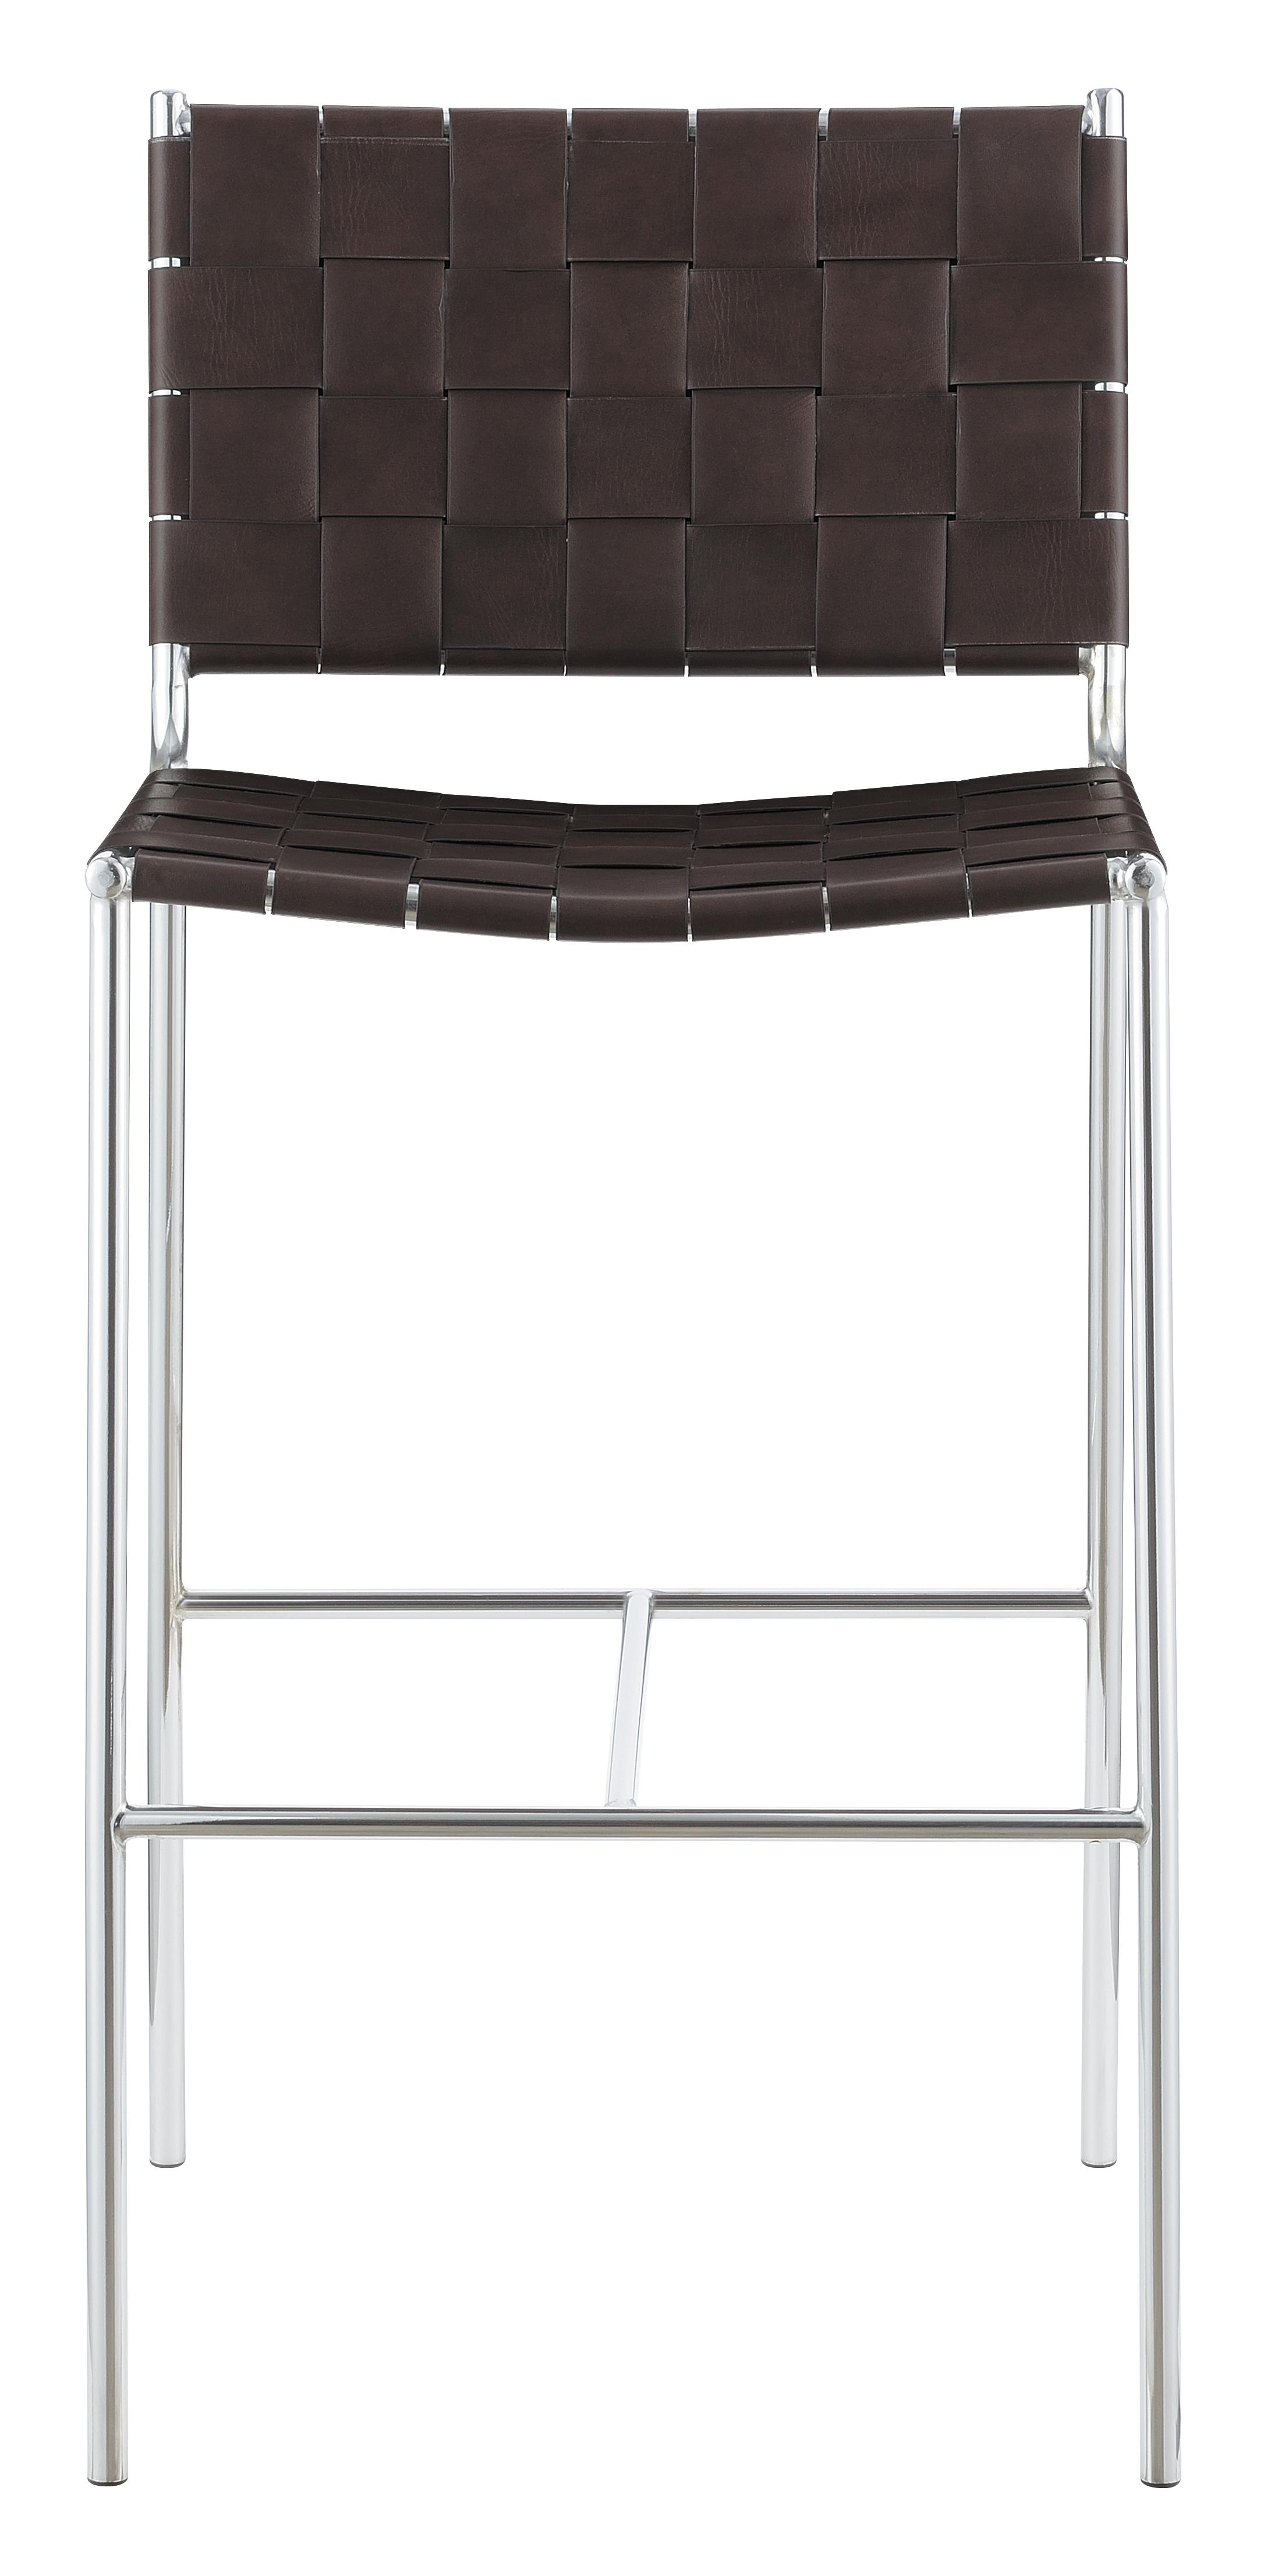 Contemporary Bar Stool 183584 183584 in Brown PVC